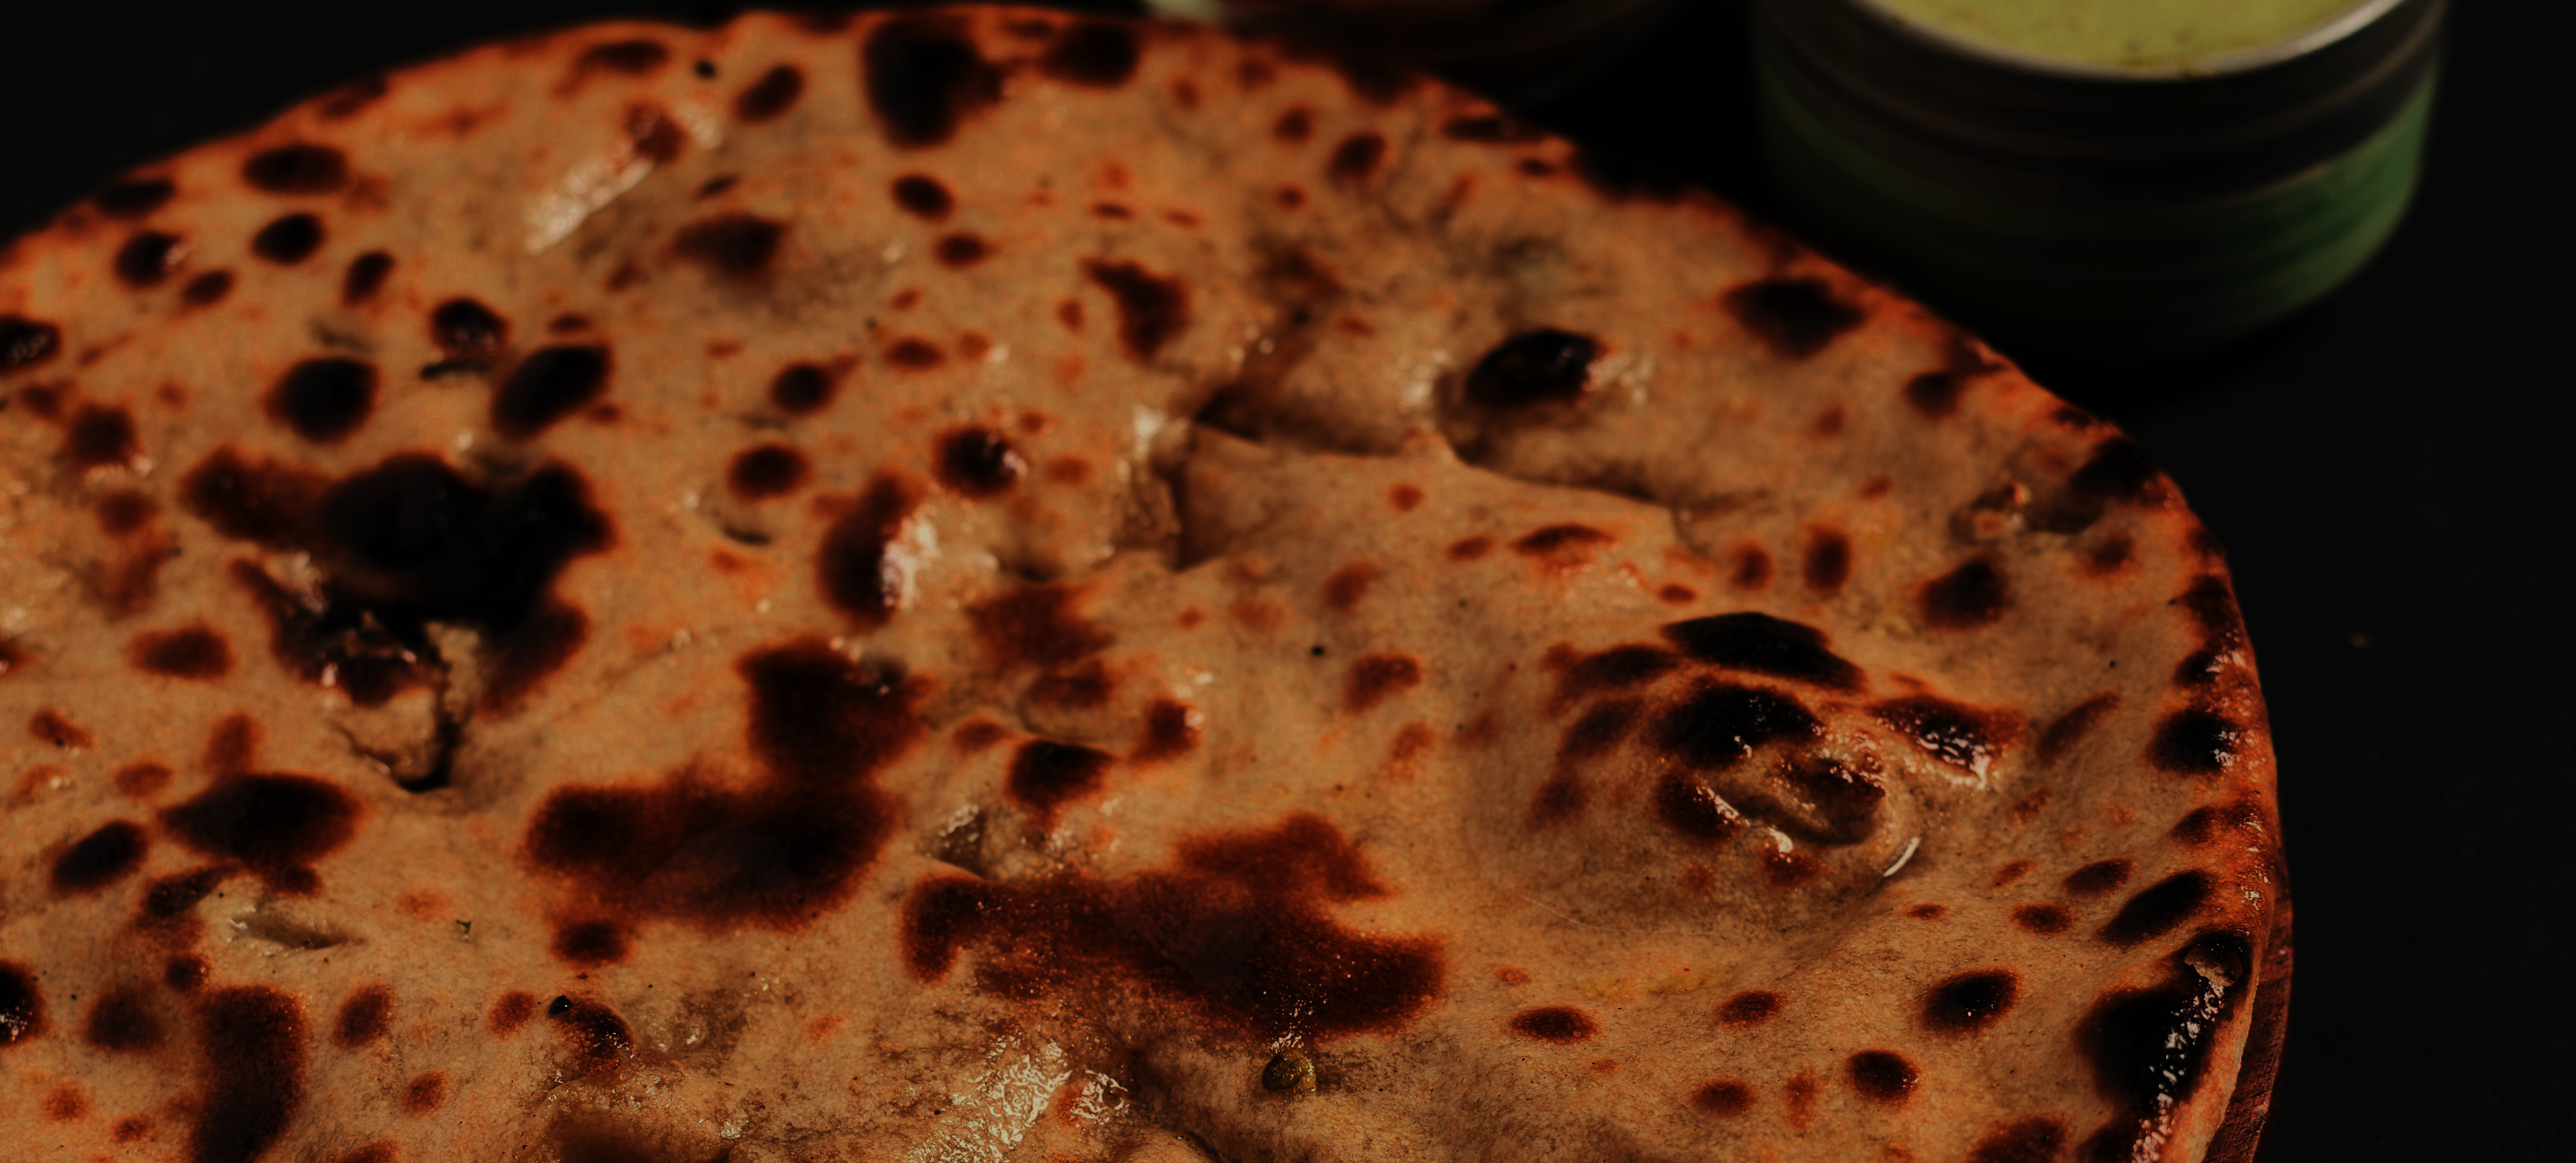 An image of two parathas